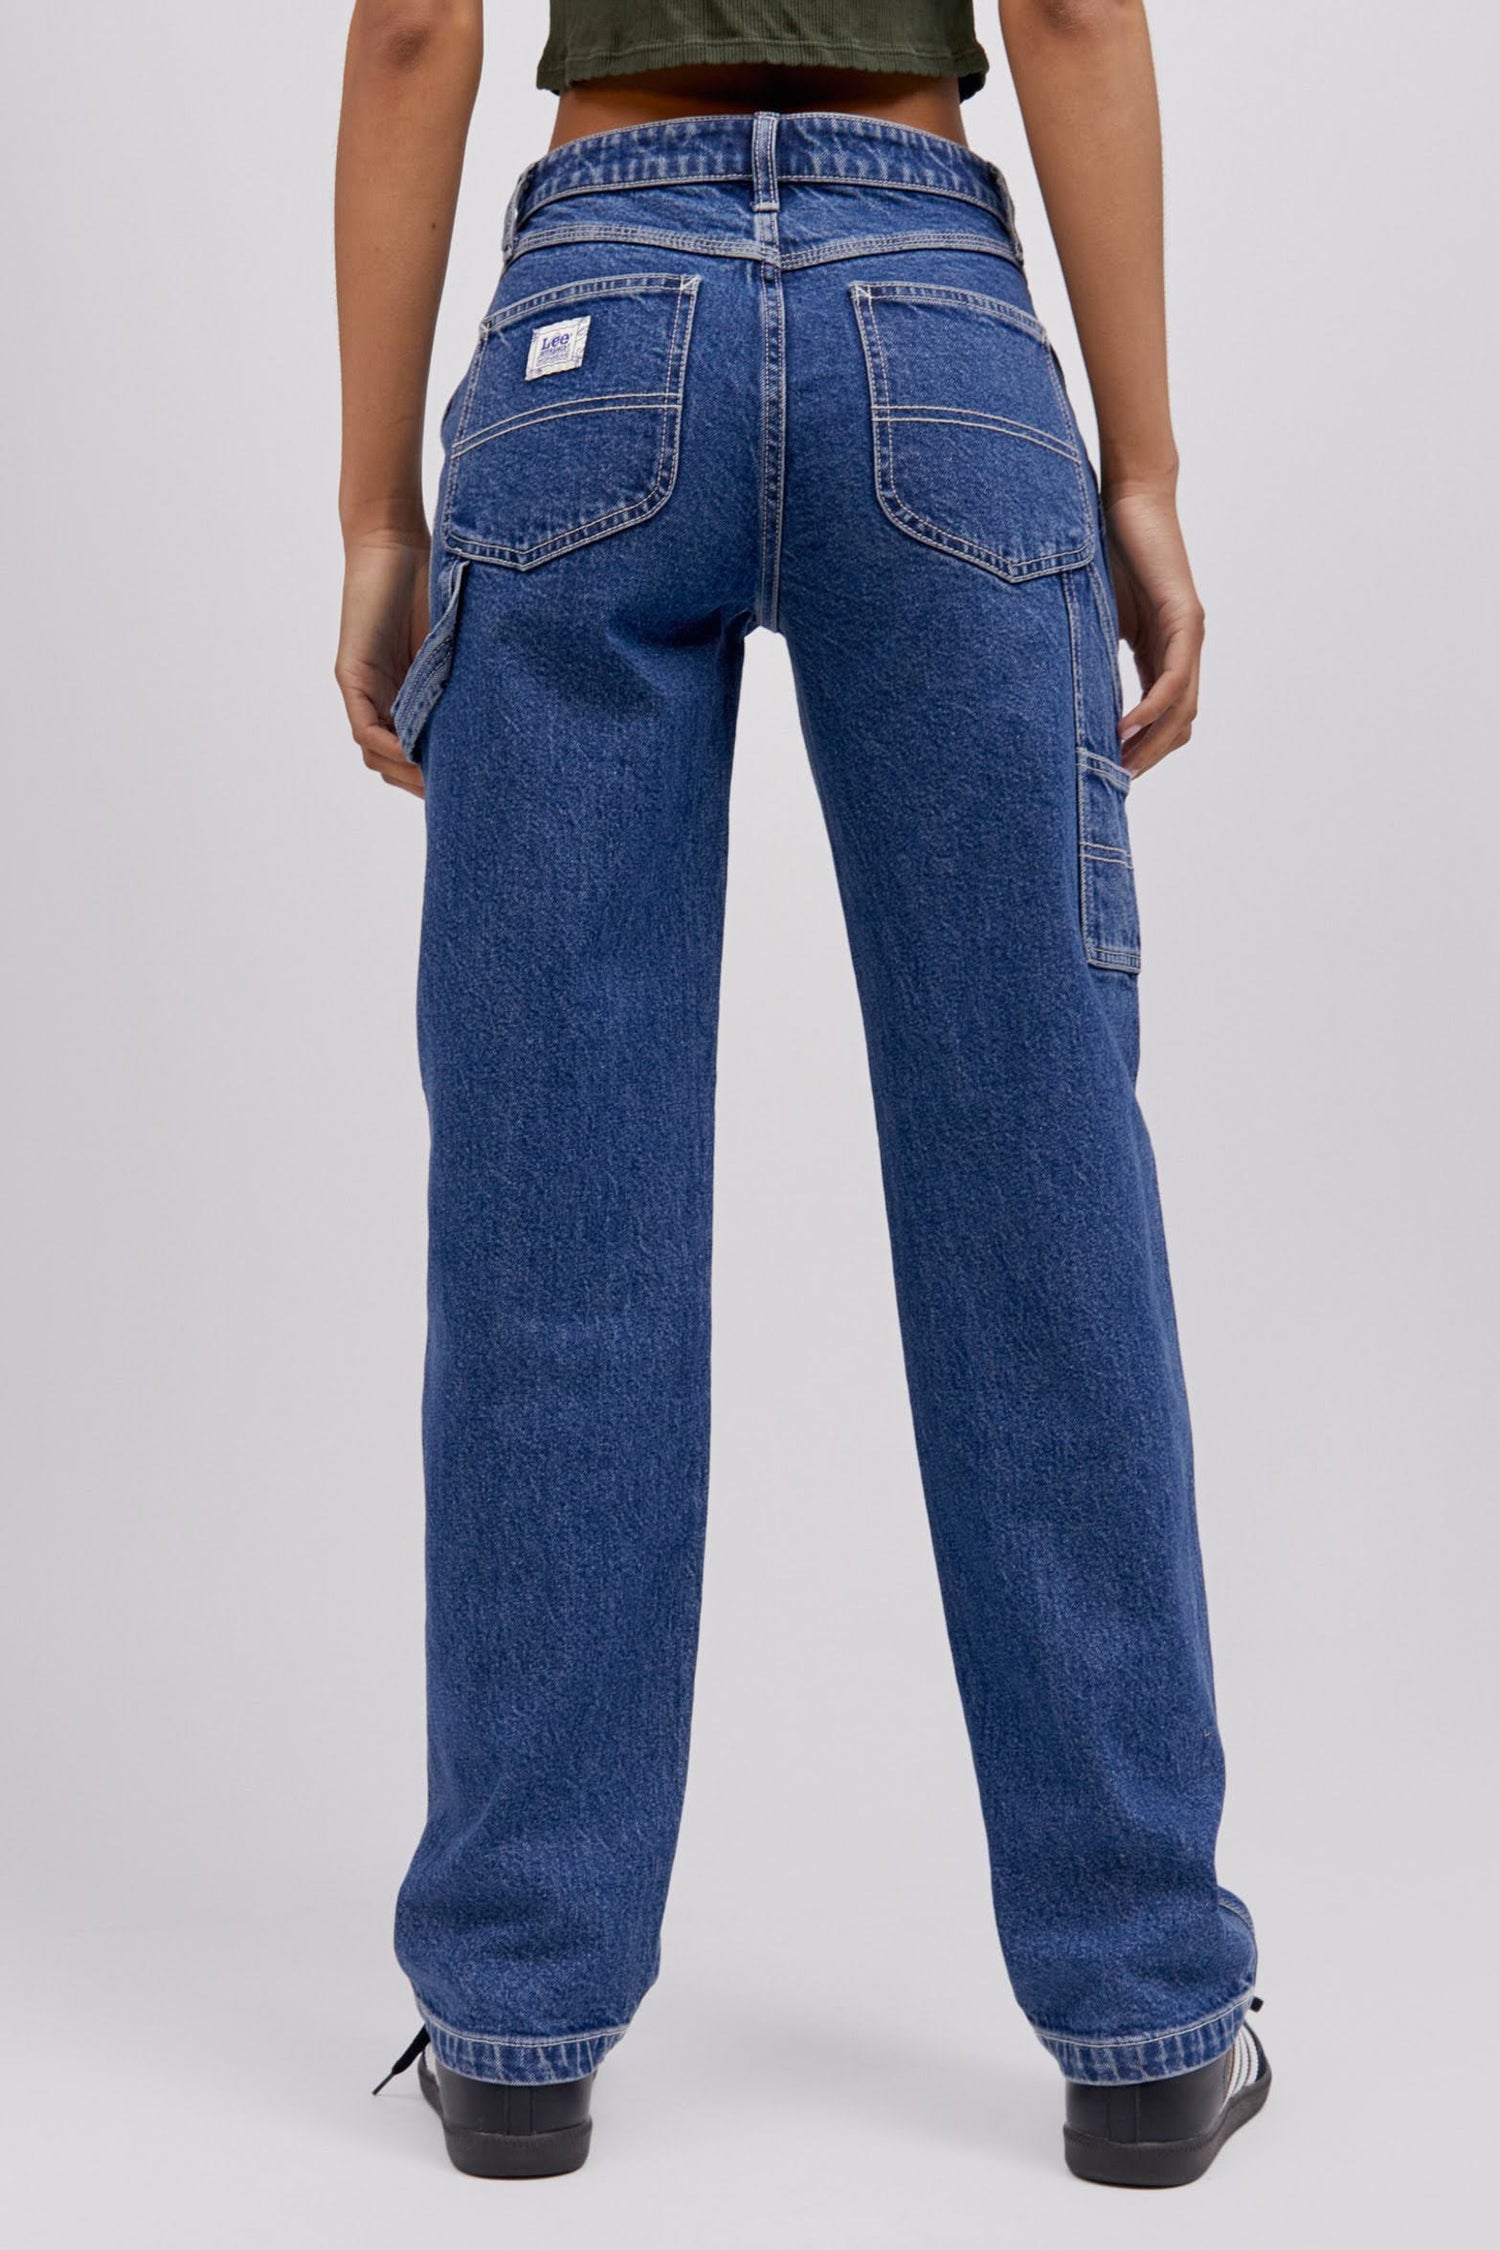 A  model featuring a blue workwear pant made from heavy cotton, accented with key Lee detailing of triple-stitched seams, oversized pockets and a uniform like hammer loop.